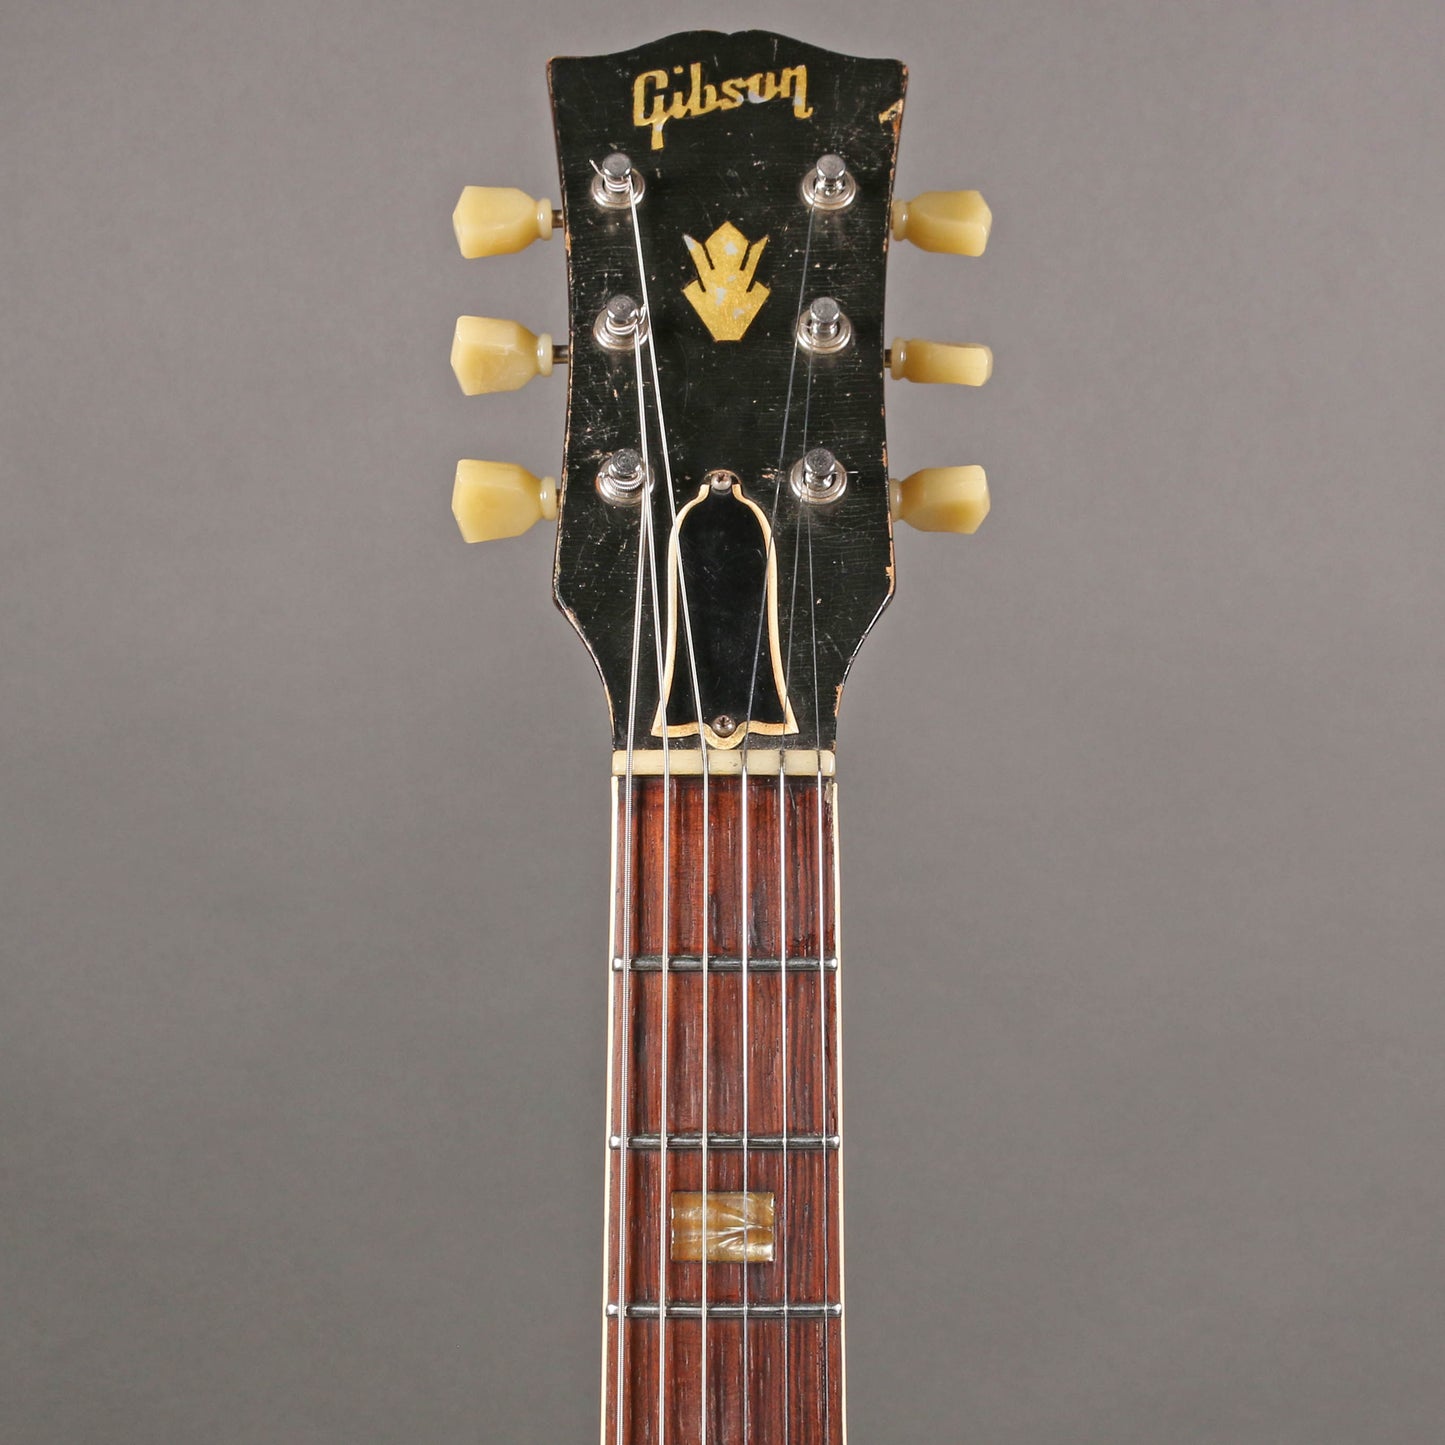 1962 Gibson ES-335TD [*Formerly owned by Keith Urban]